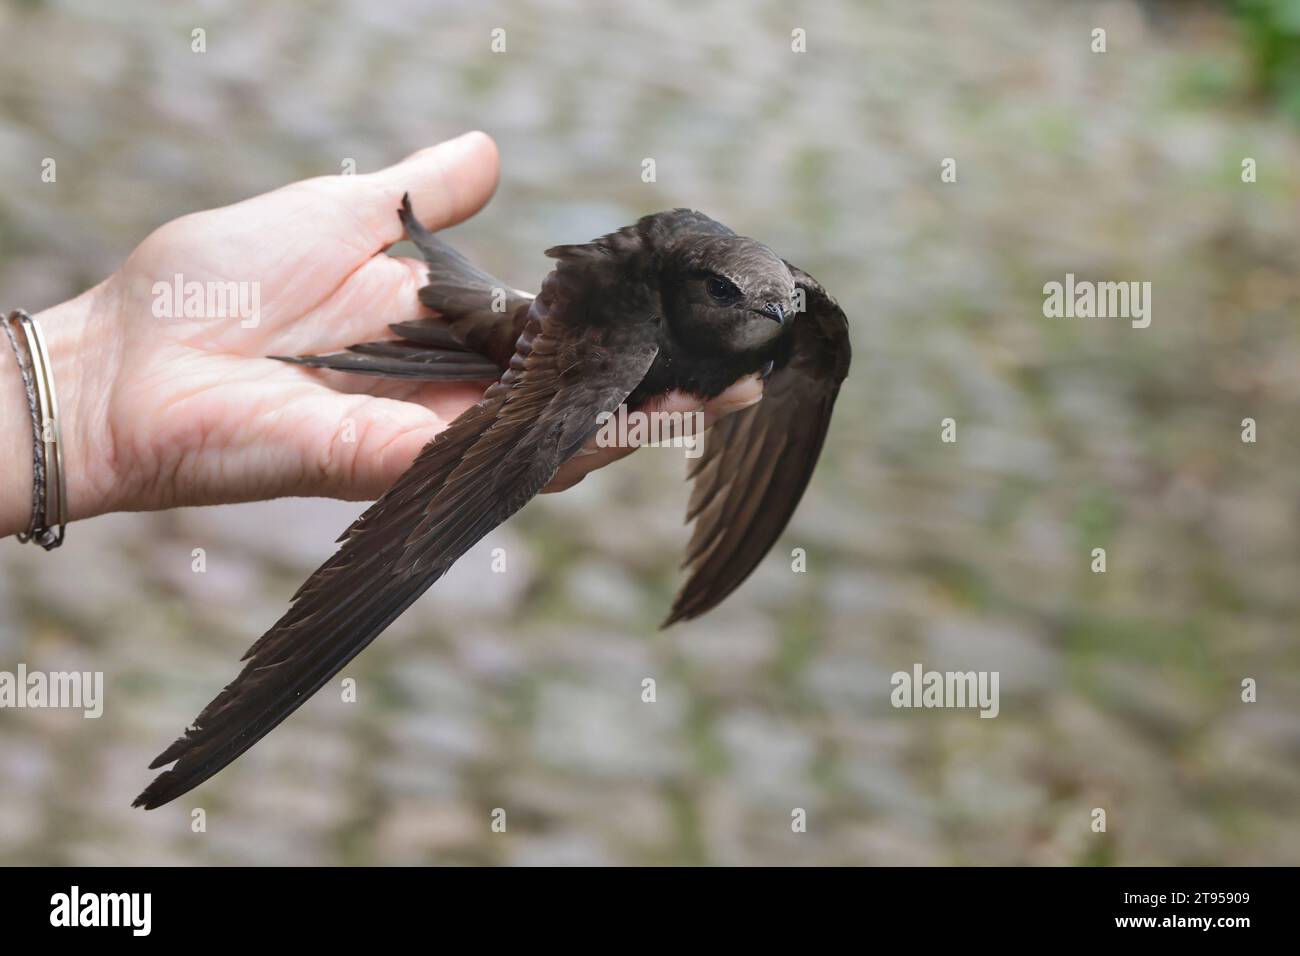 Eurasian swift (Apus apus), perching in a hand, bird in need of help is released into the wild, Germany Stock Photo